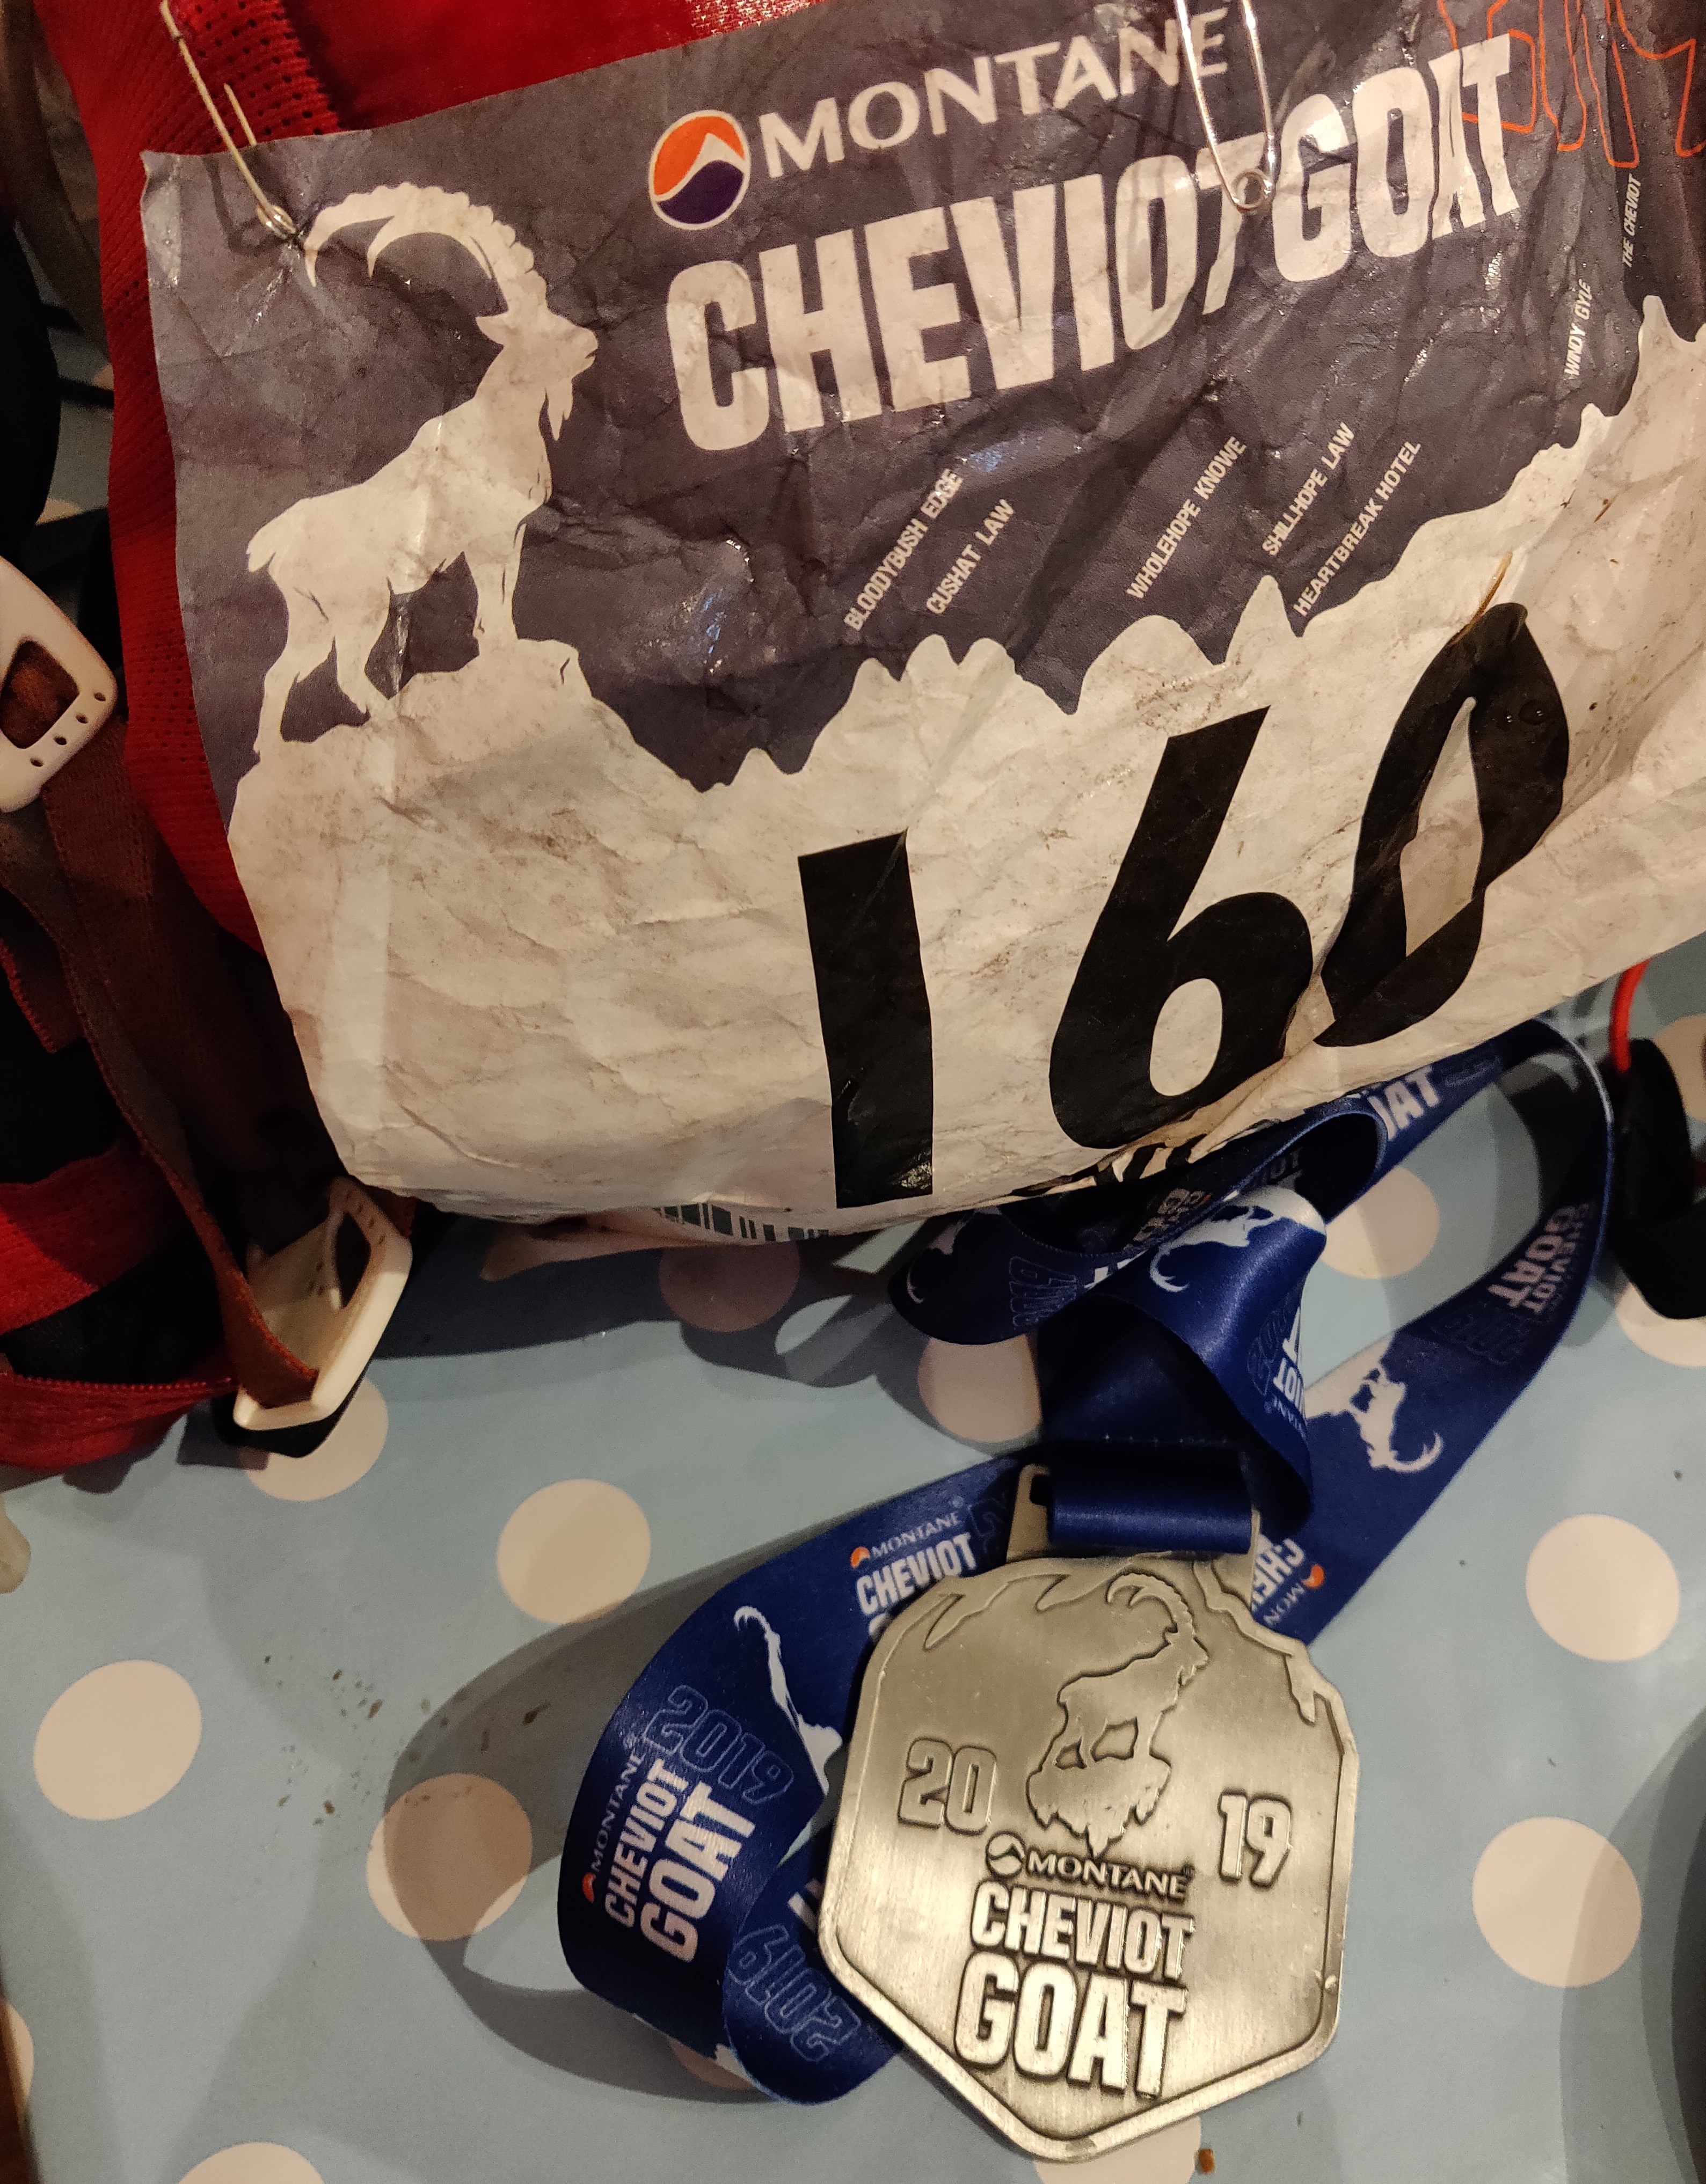 Food and medals